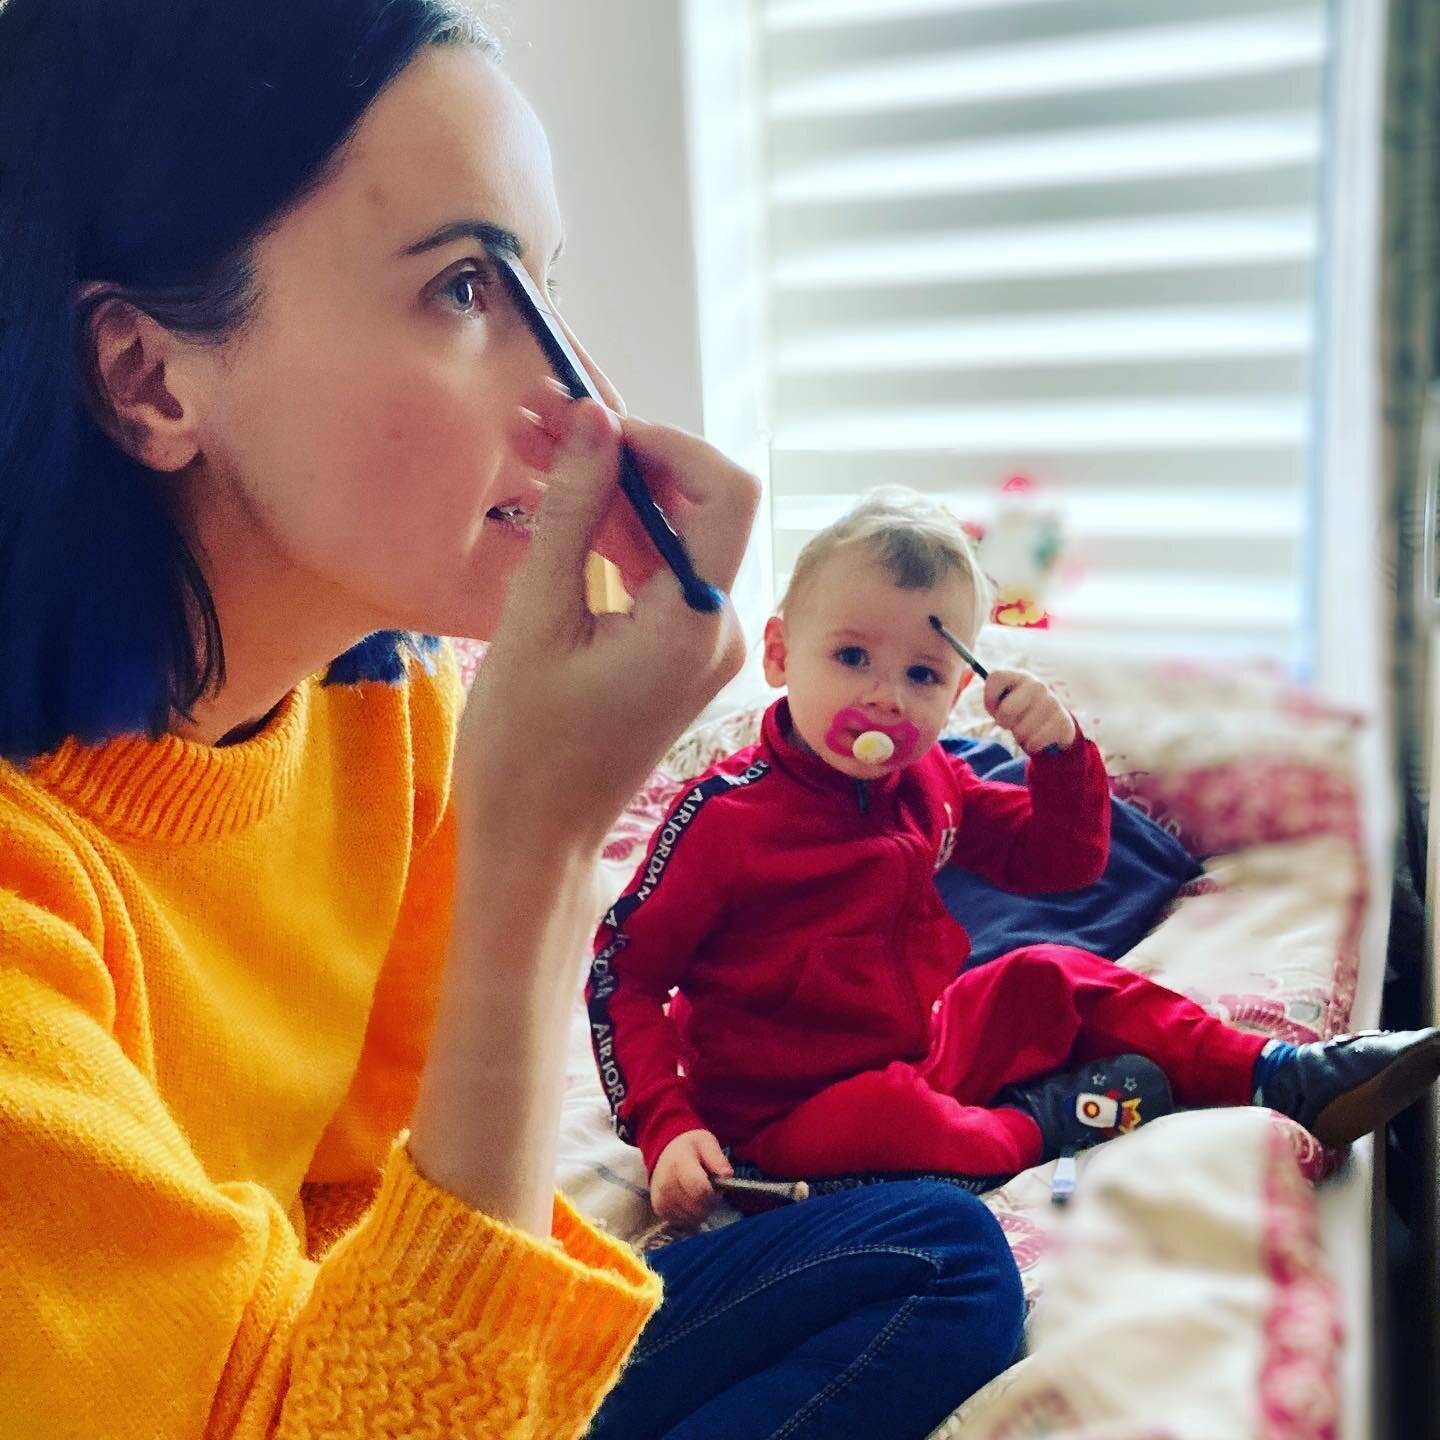 💤 Totally Nailing It 💤 &lsquo;One can never have enough eyebrows&rsquo;, Toddler MUA muses. 💤 #eyebrowsgamestrong #toddlerlife #mua #toddlerdoesmakeup